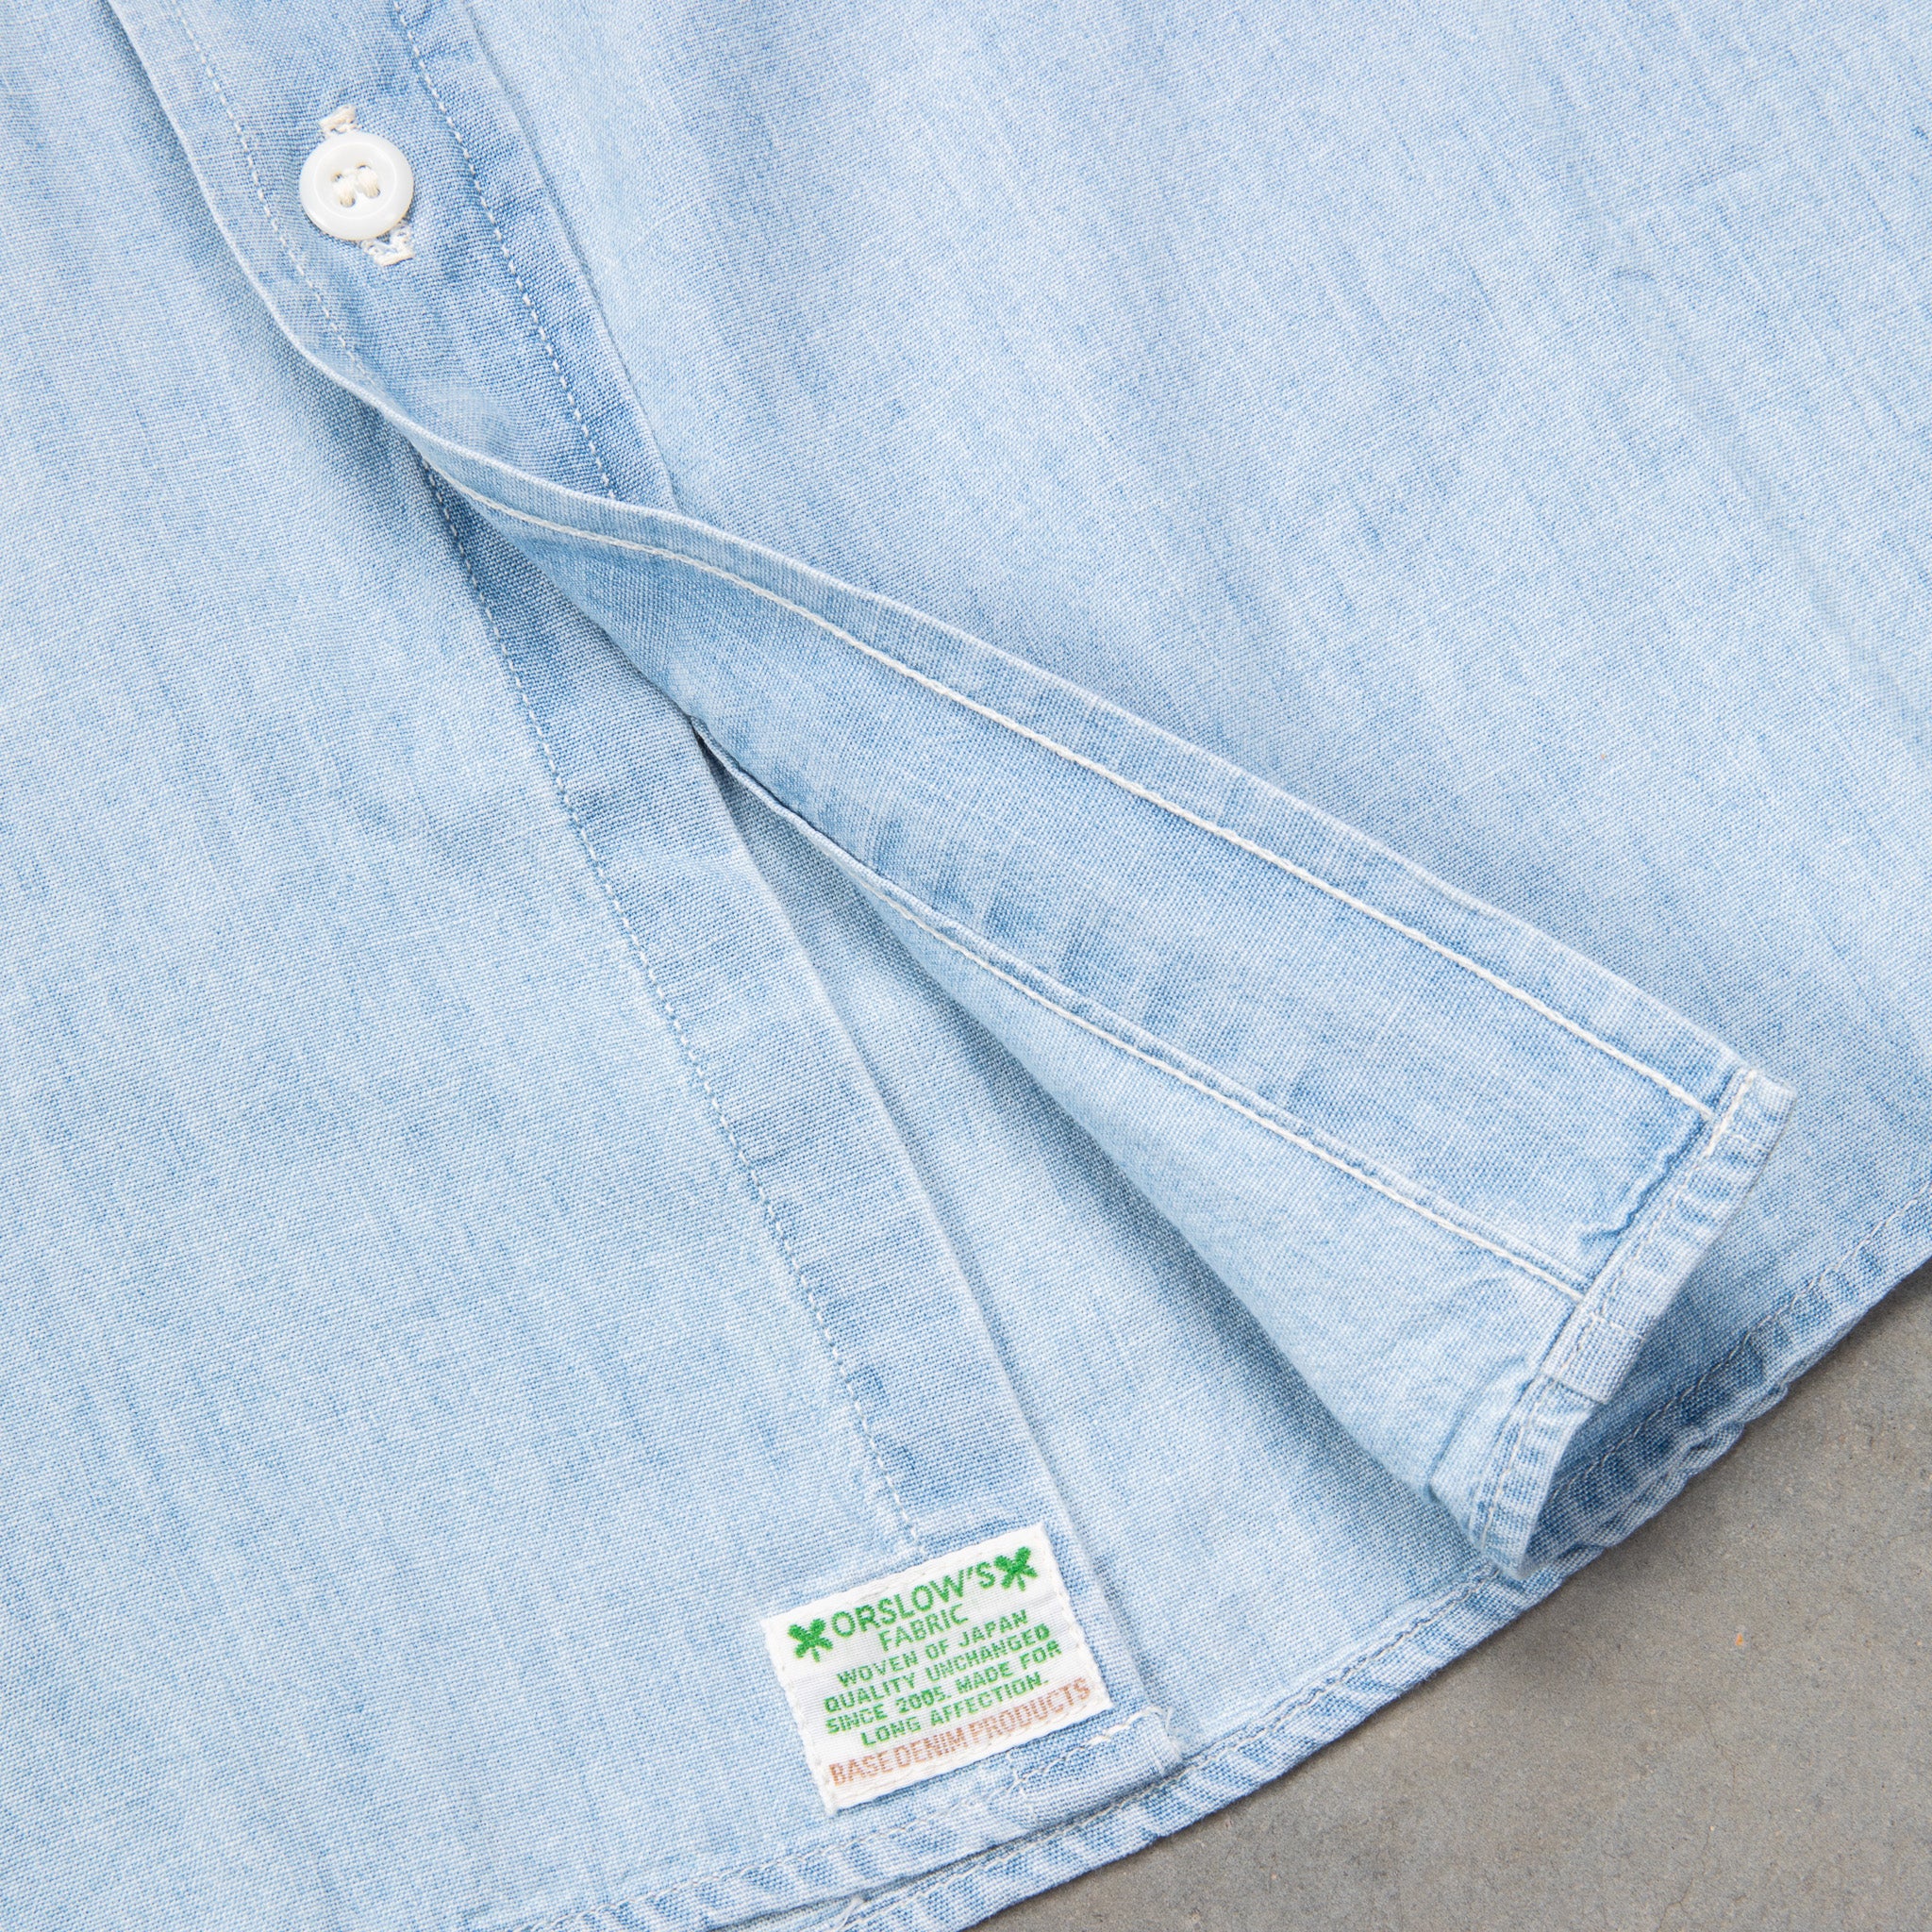 Orslow Bleached Chambray Work Shirt